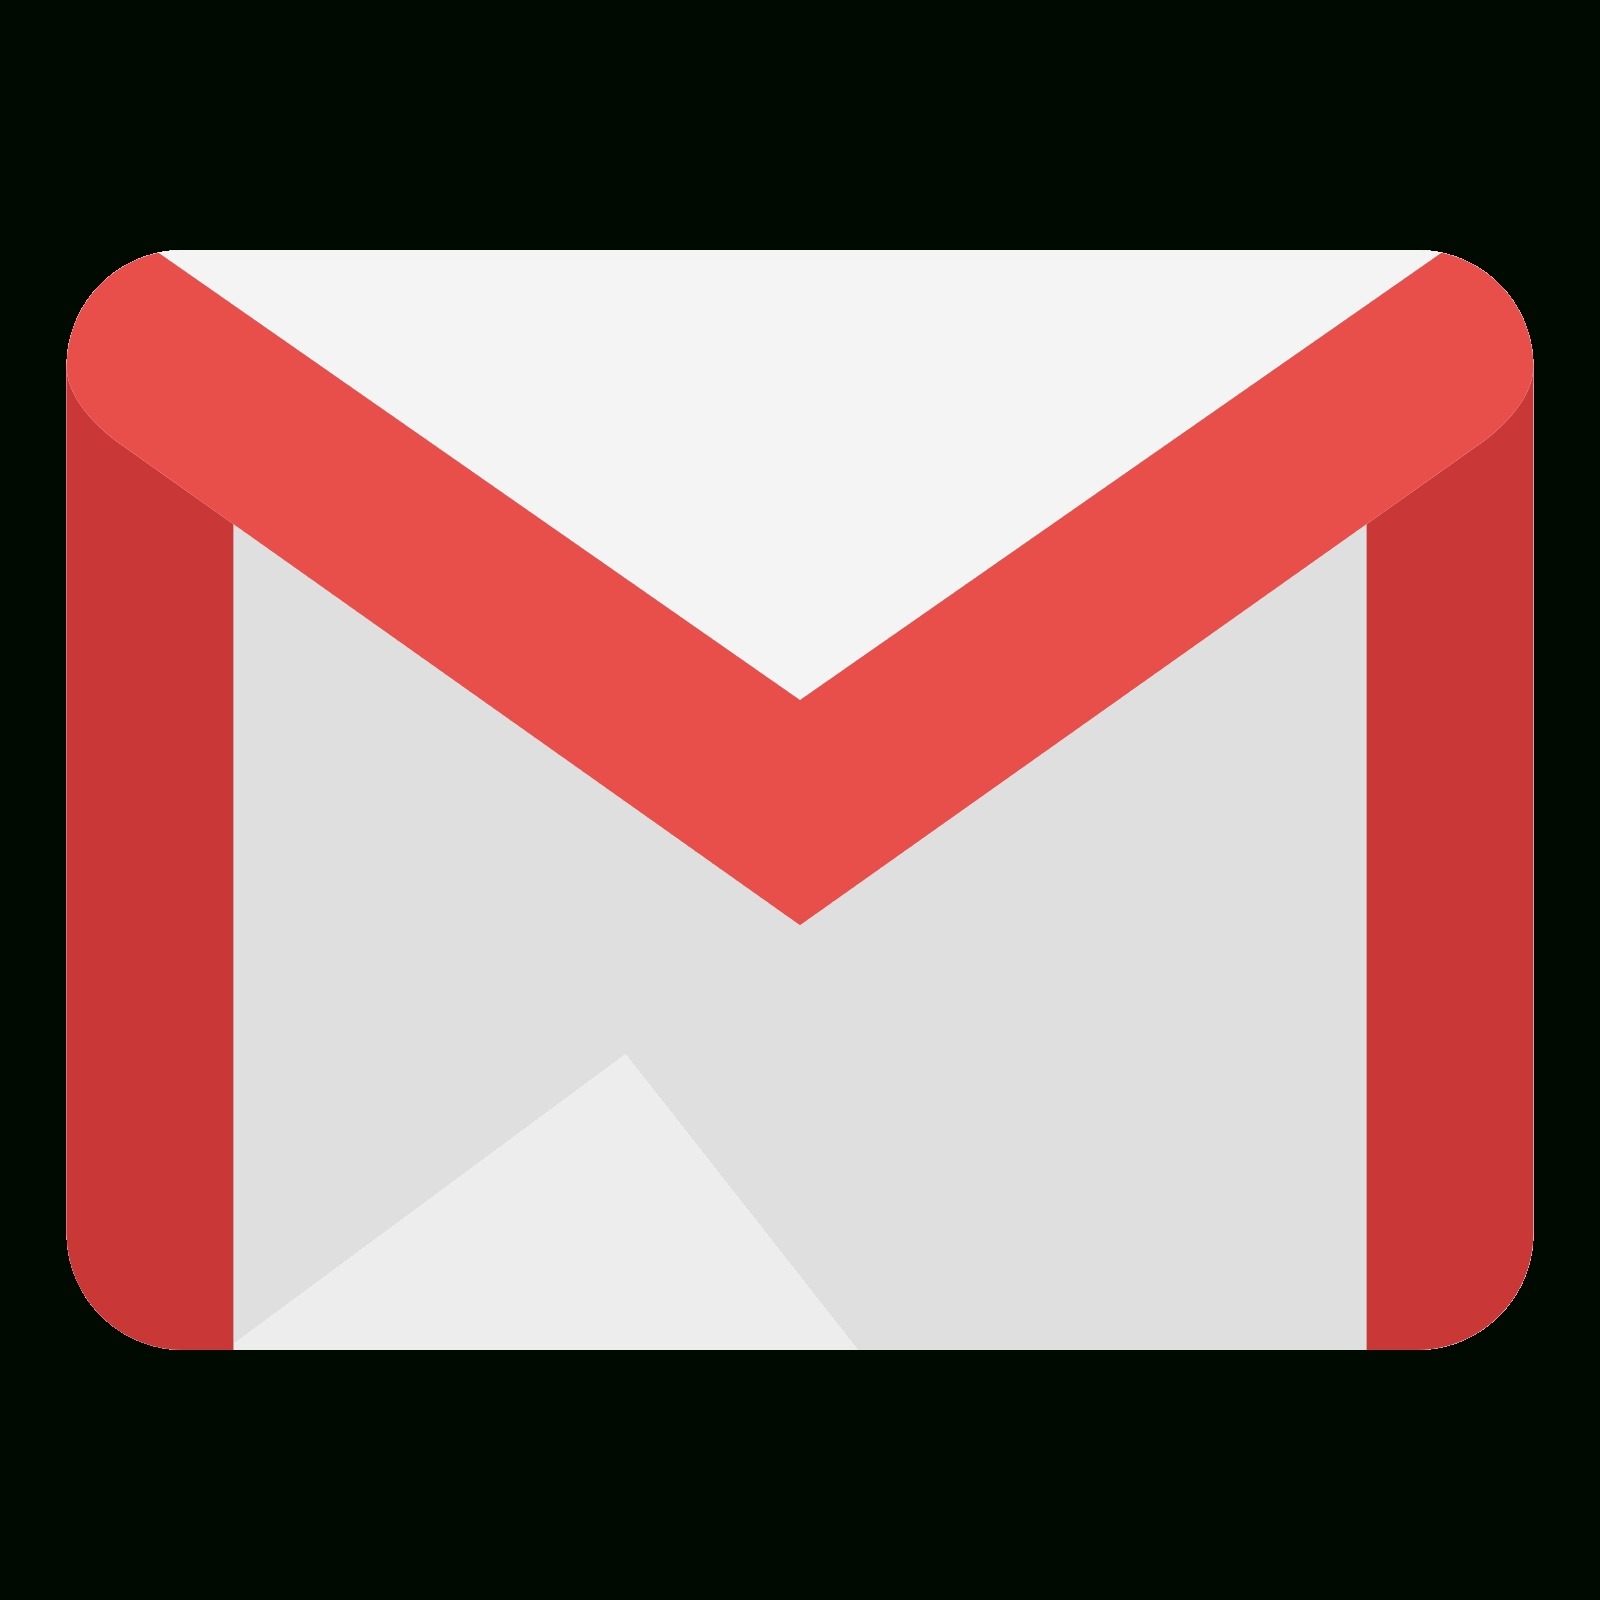 how to put a gmail icon on desktop